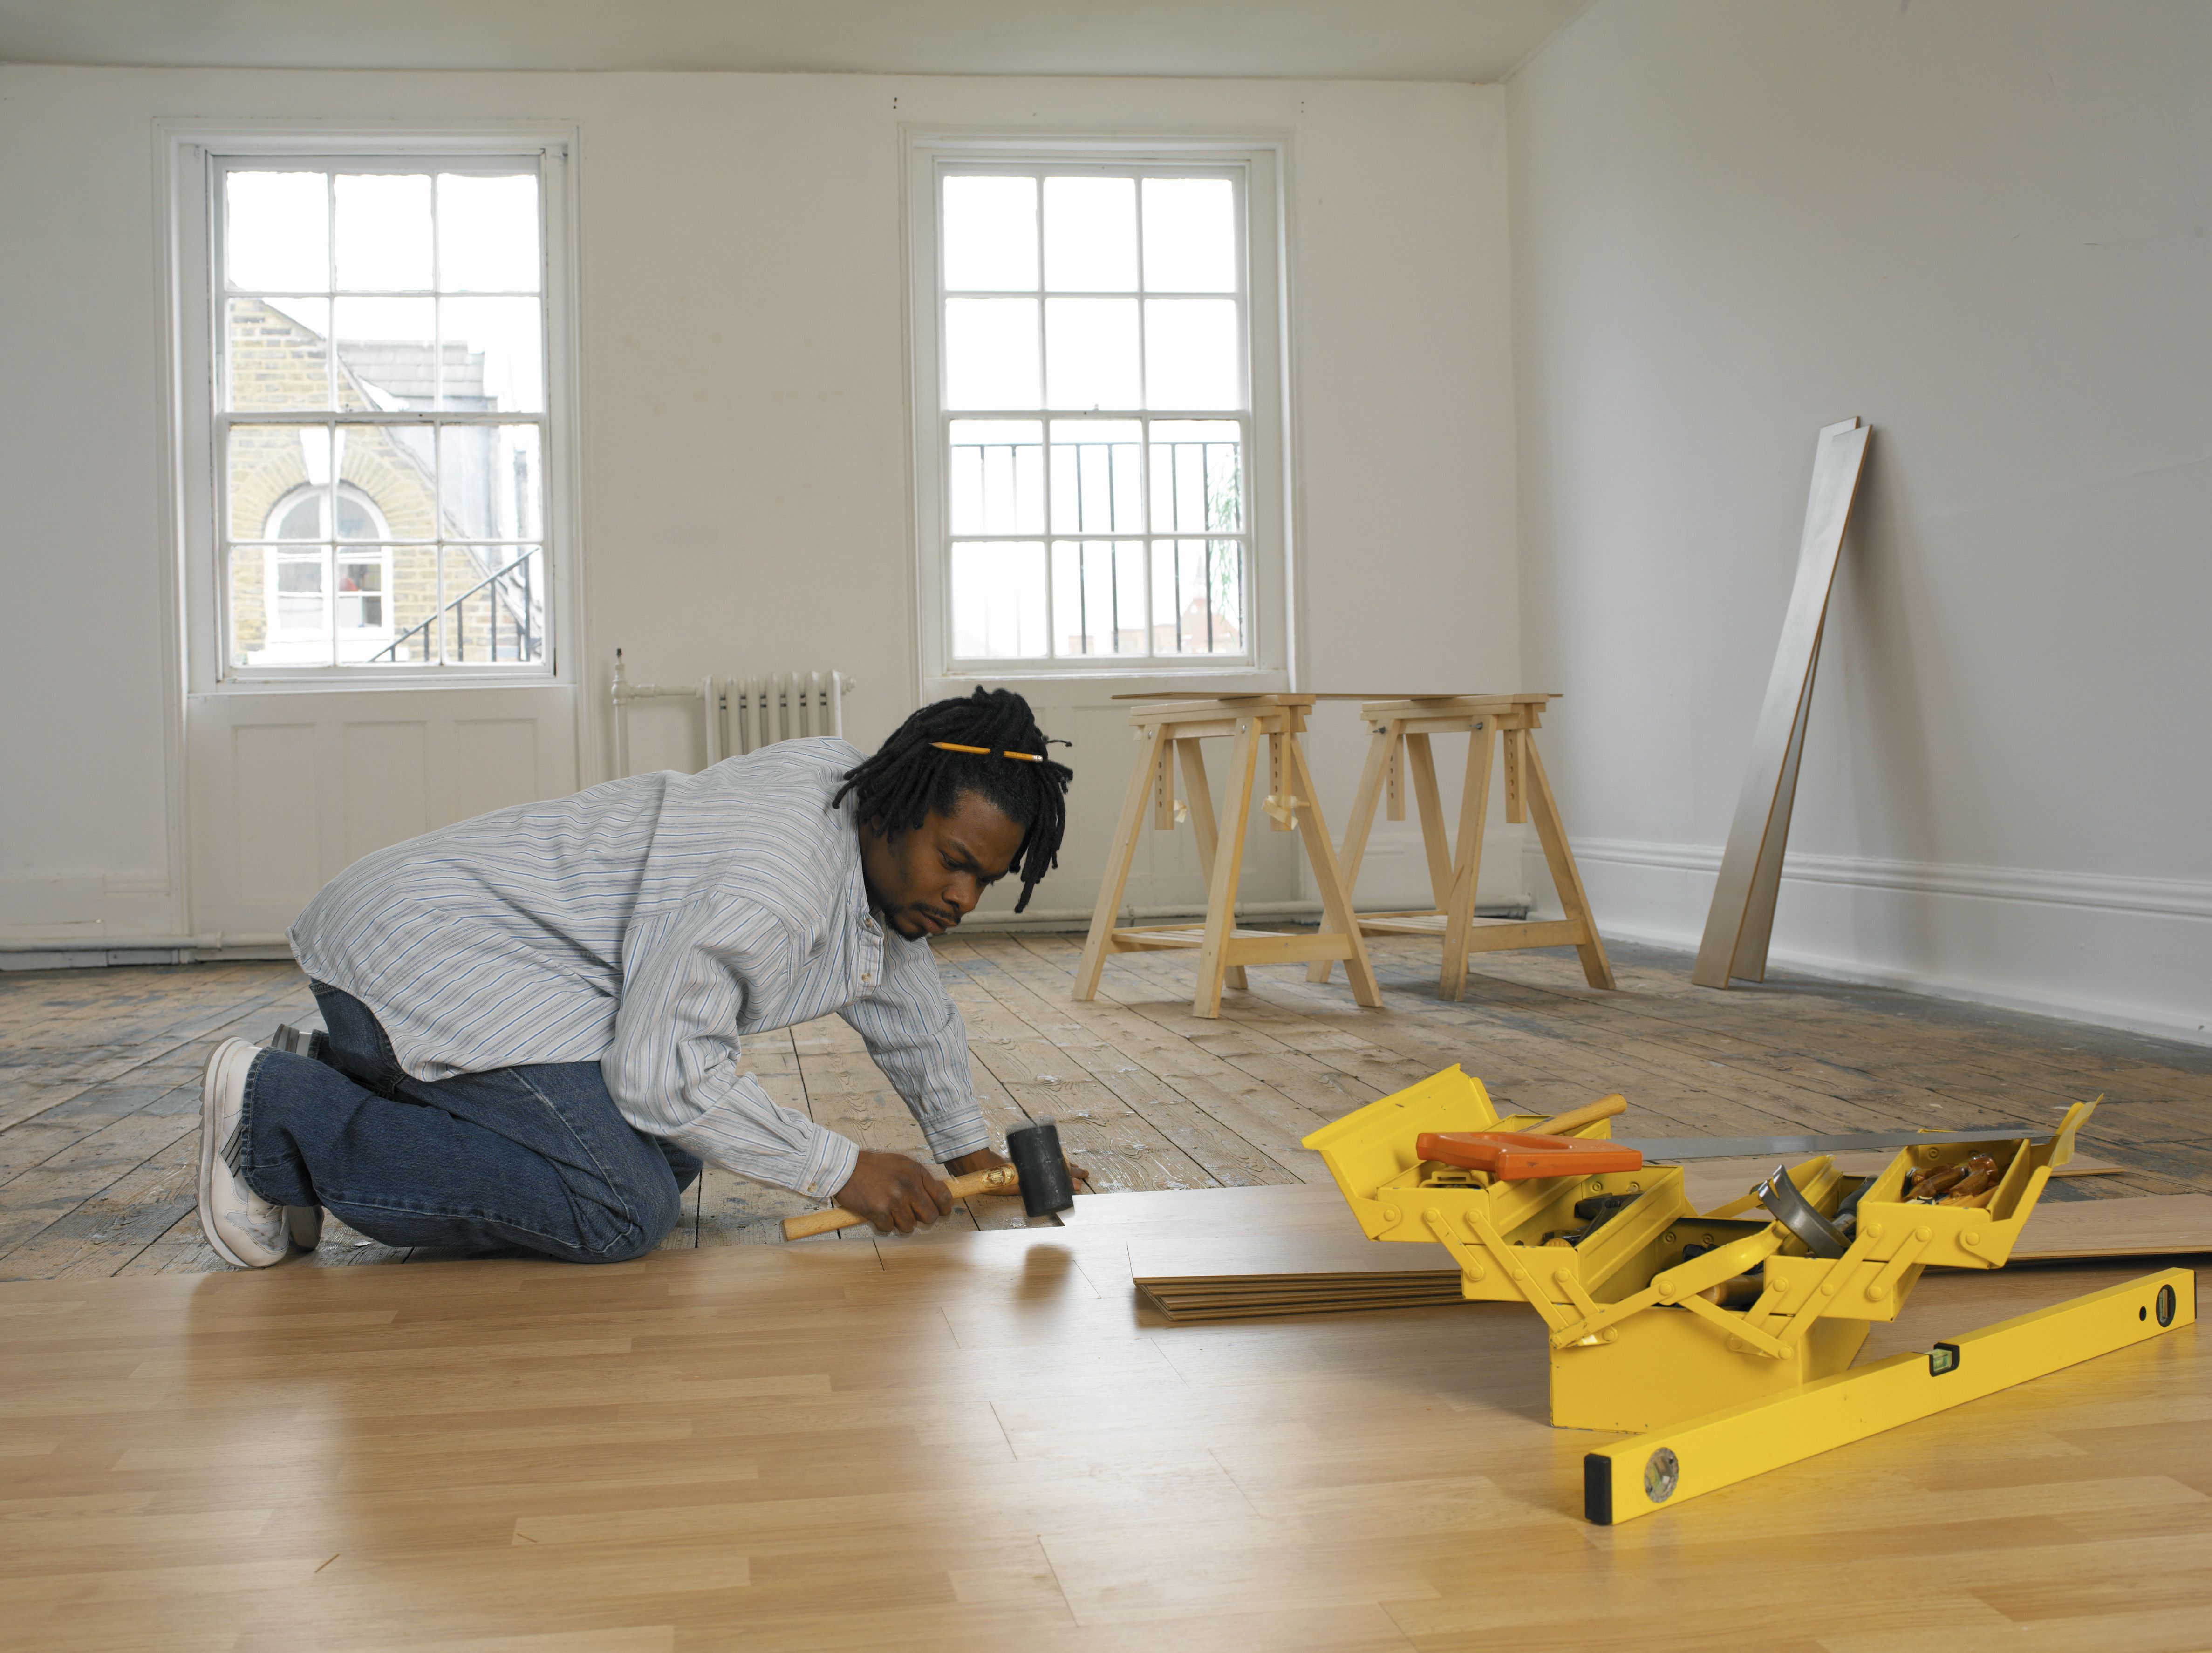 11 Best Engineered Hardwood Flooring Price Per Square Foot 2023 free download engineered hardwood flooring price per square foot of ikea flooring review overview in young man laying floor 200199826 001 57e96a973df78c690f719440